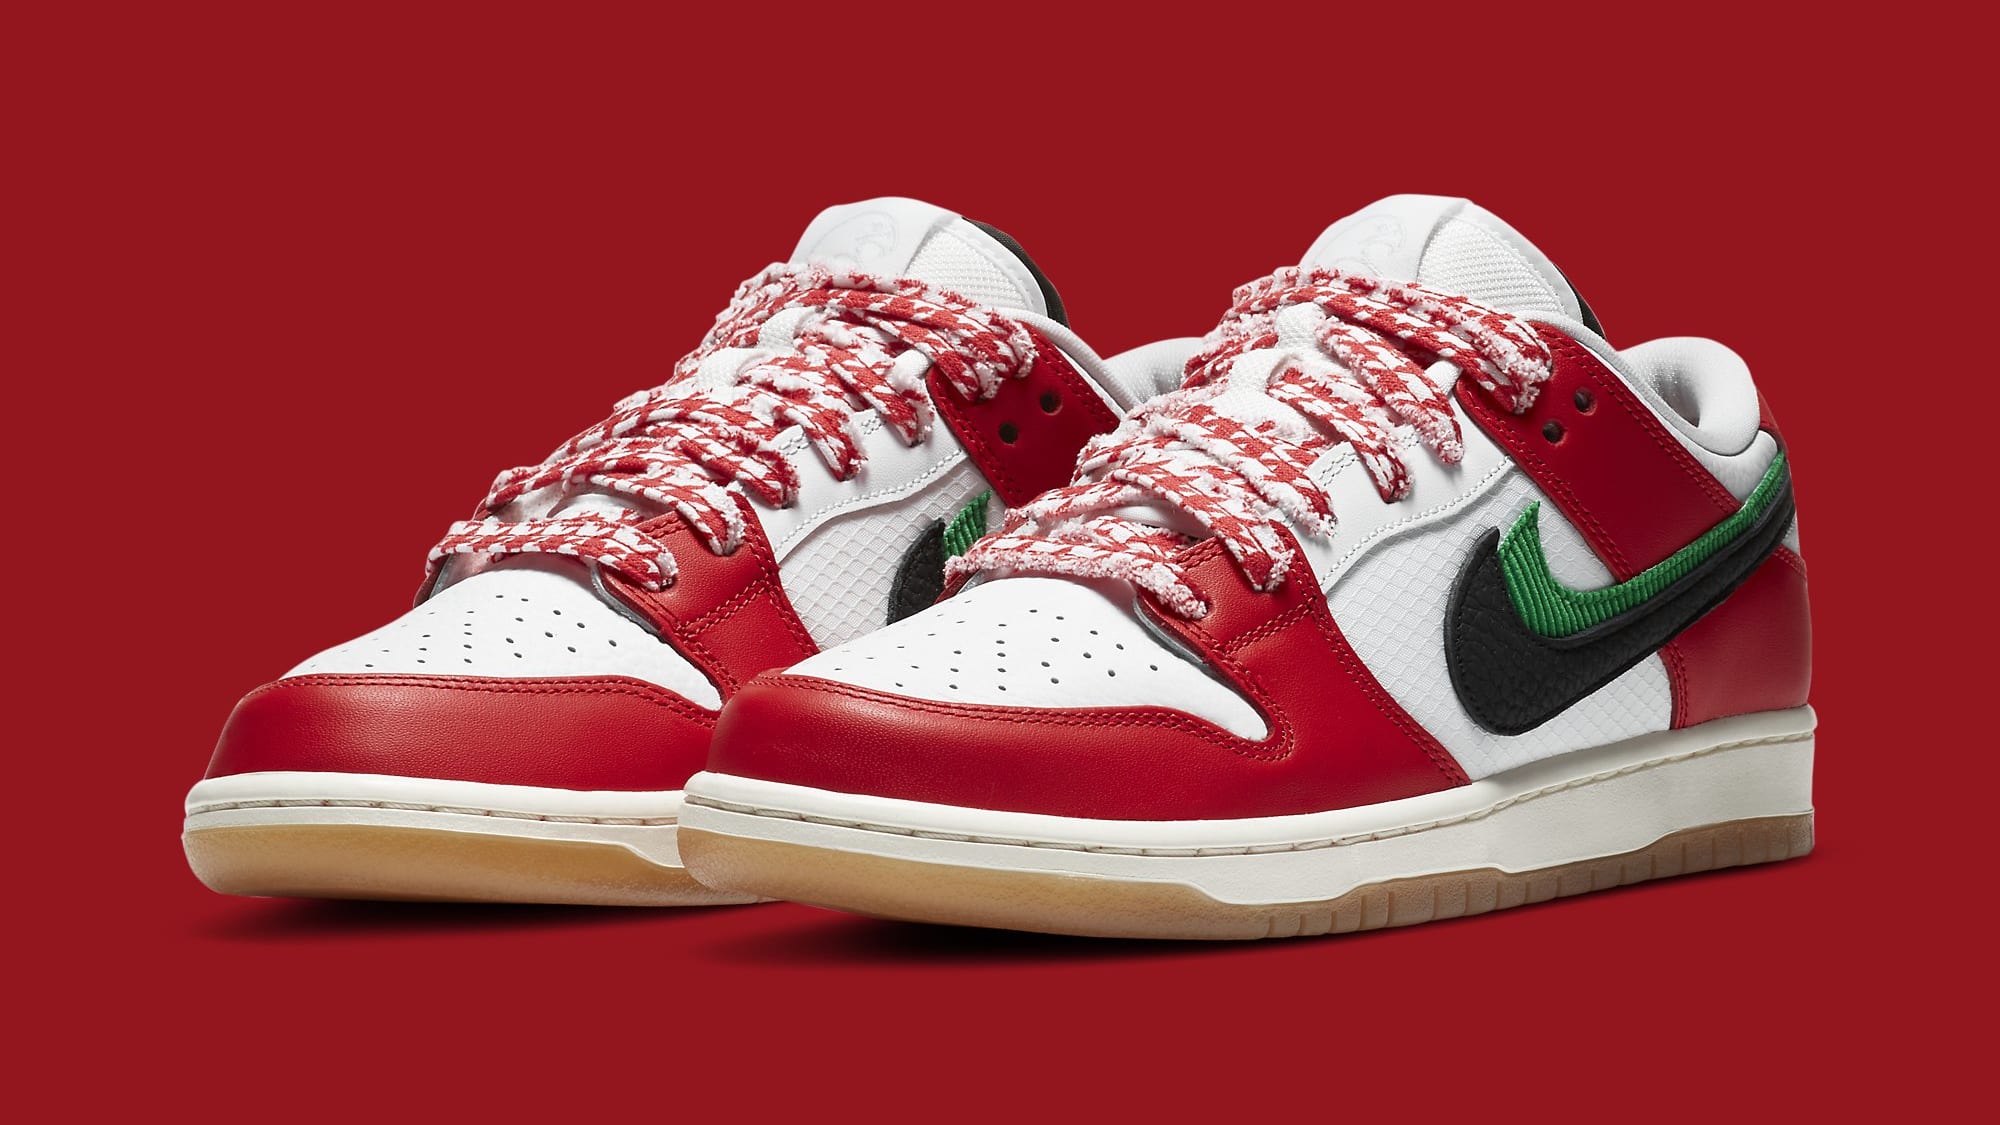 Frame's 'Habibi' Nike SB Dunk Is Here. Where Did It Come From